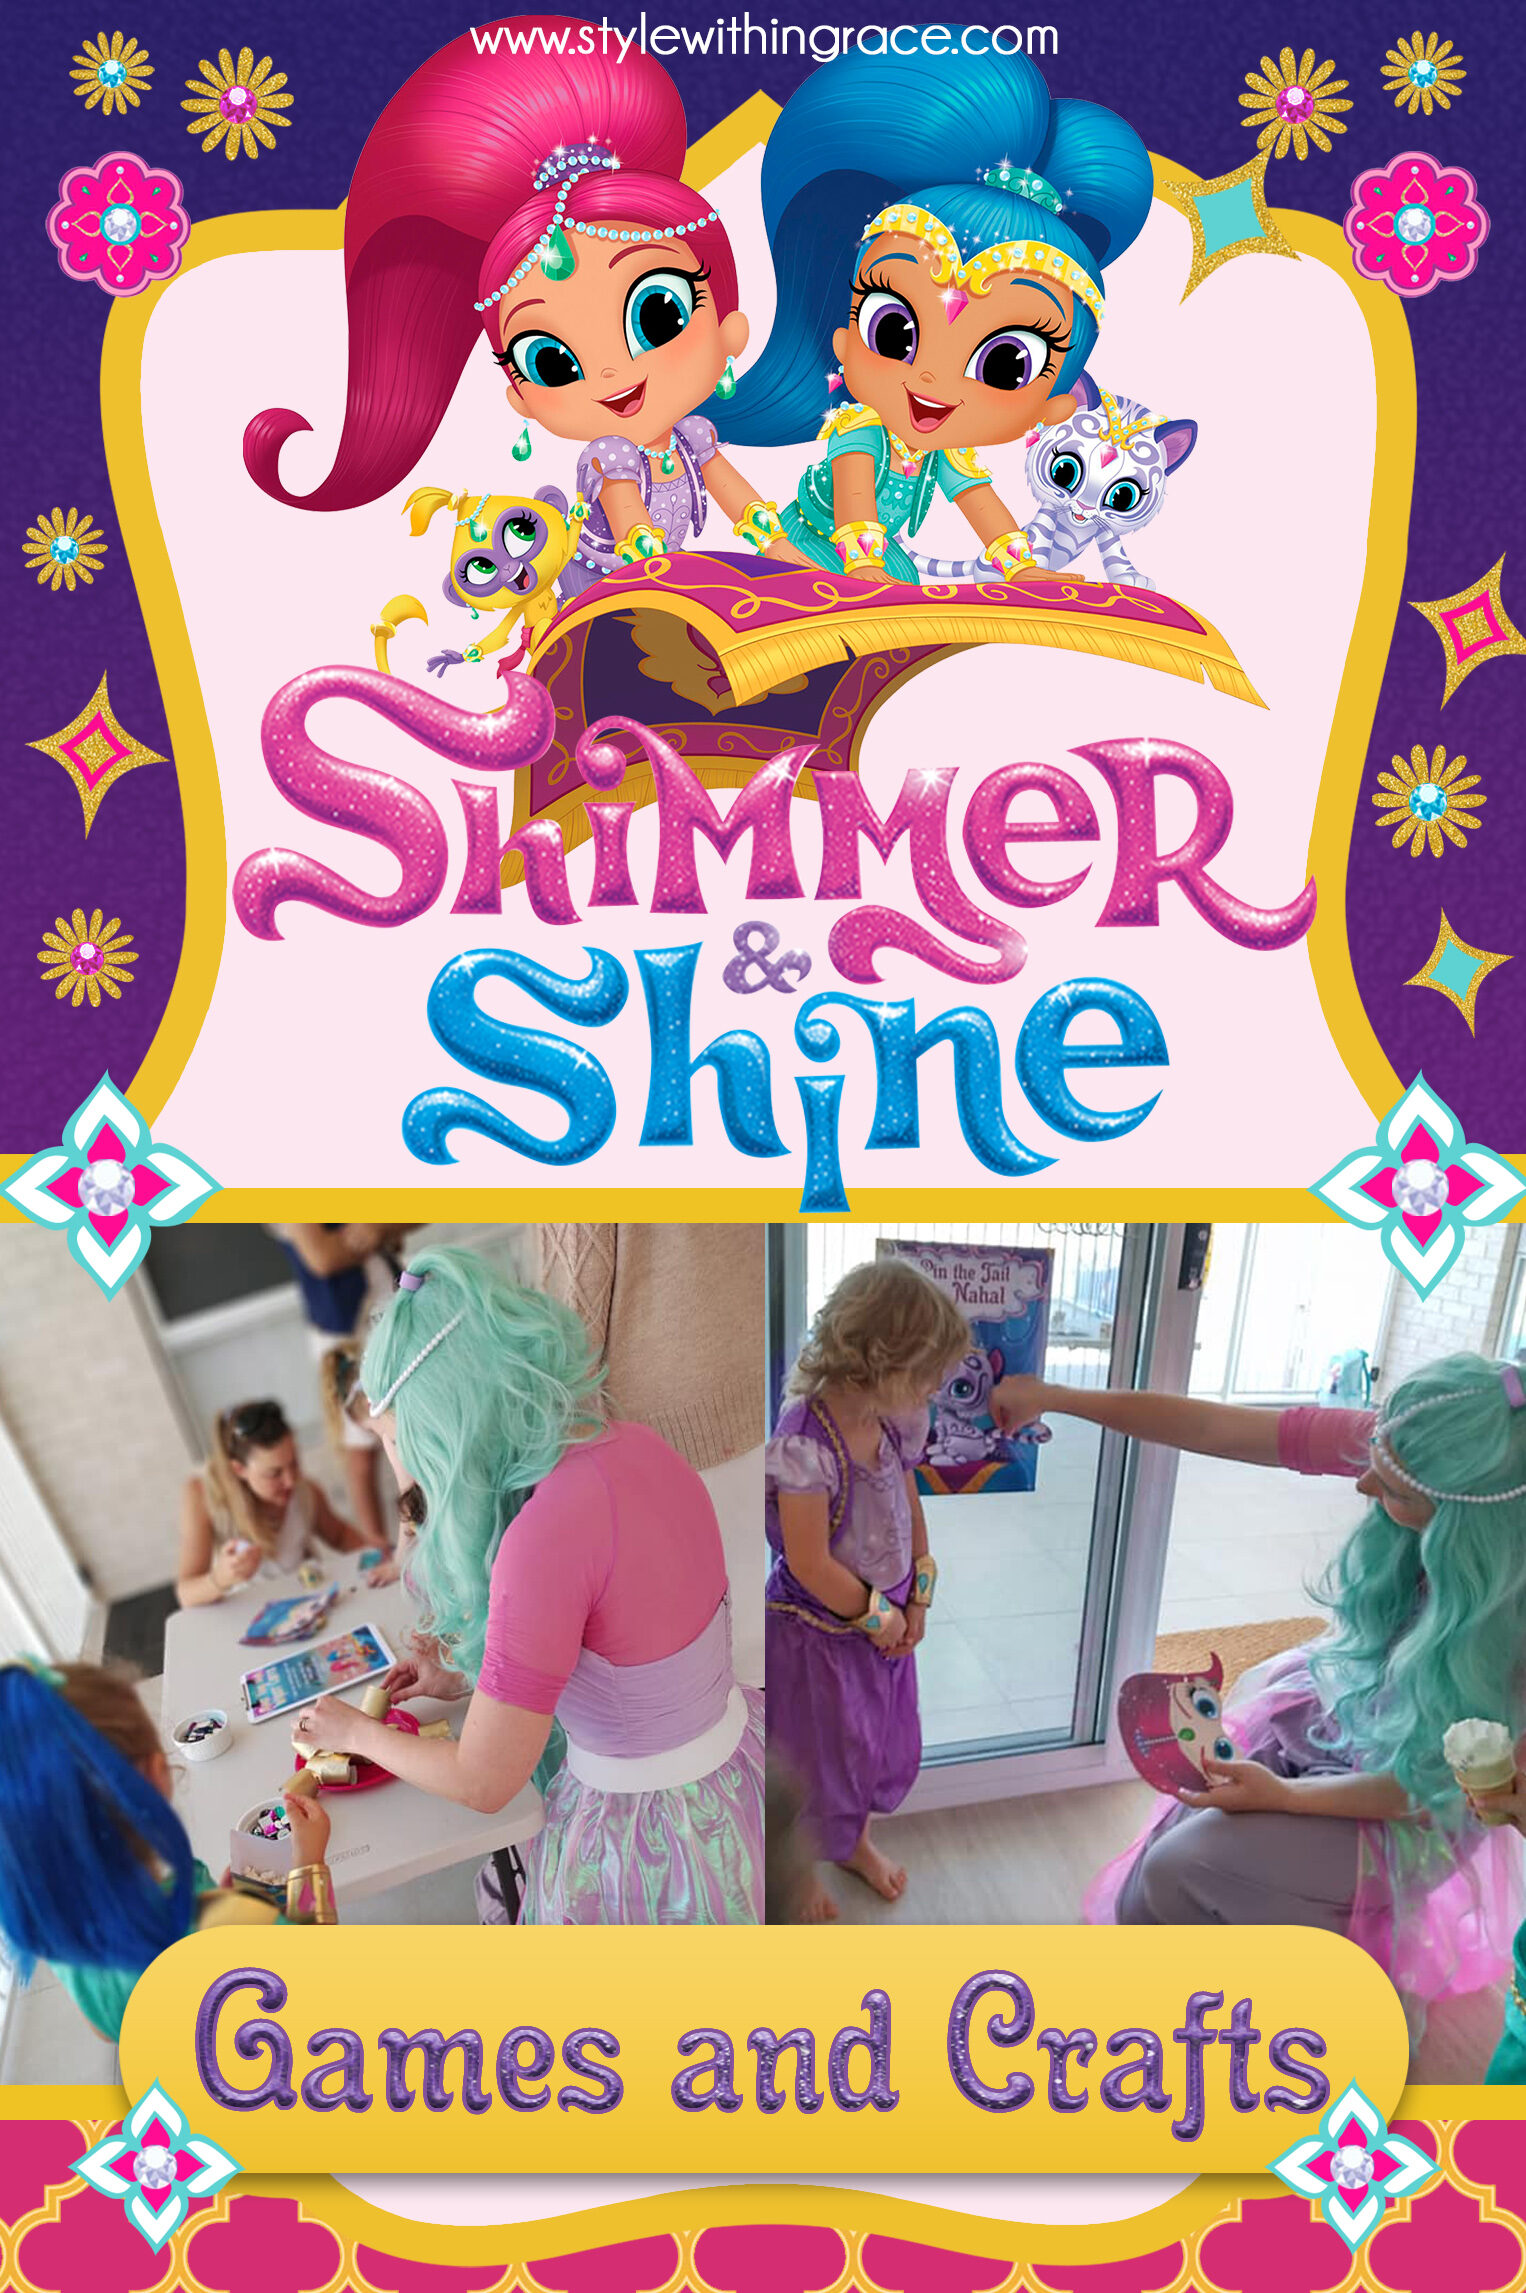 Shimmer and Shine Birthday Party Pinterest Games and Crafts